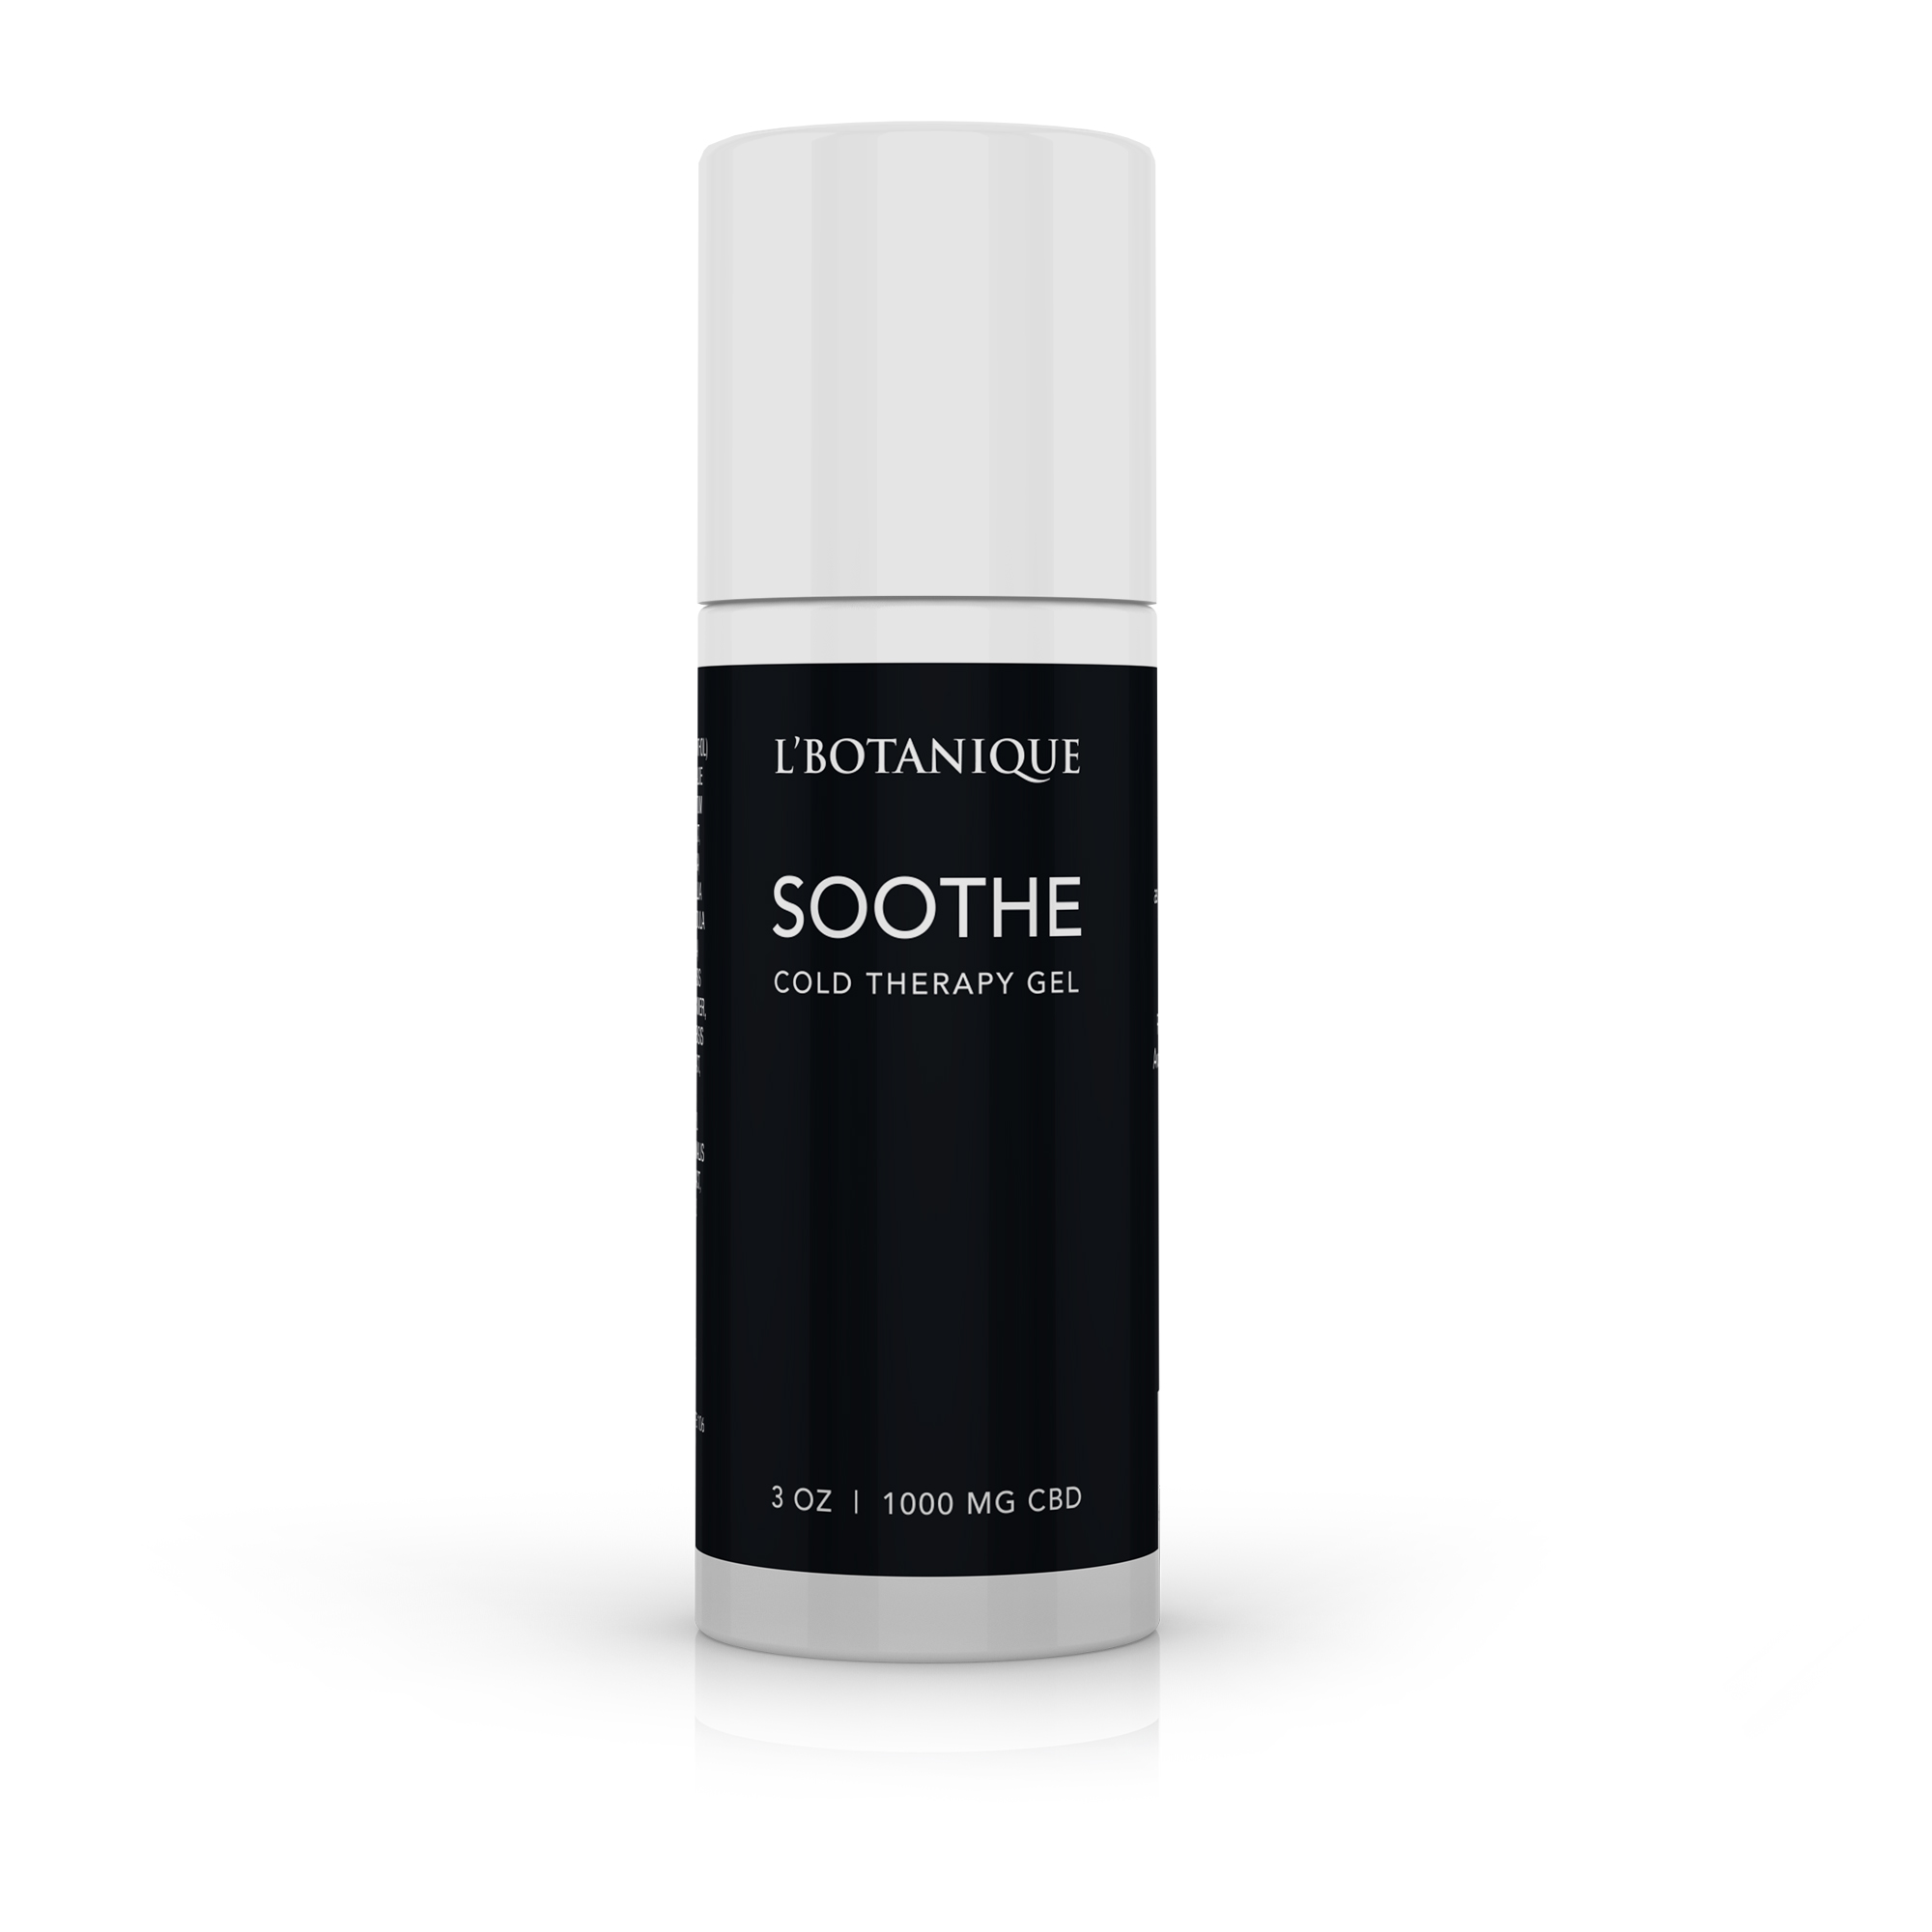 L'Botanique Soothe 1000 mg CBD Cold Therapy Gel